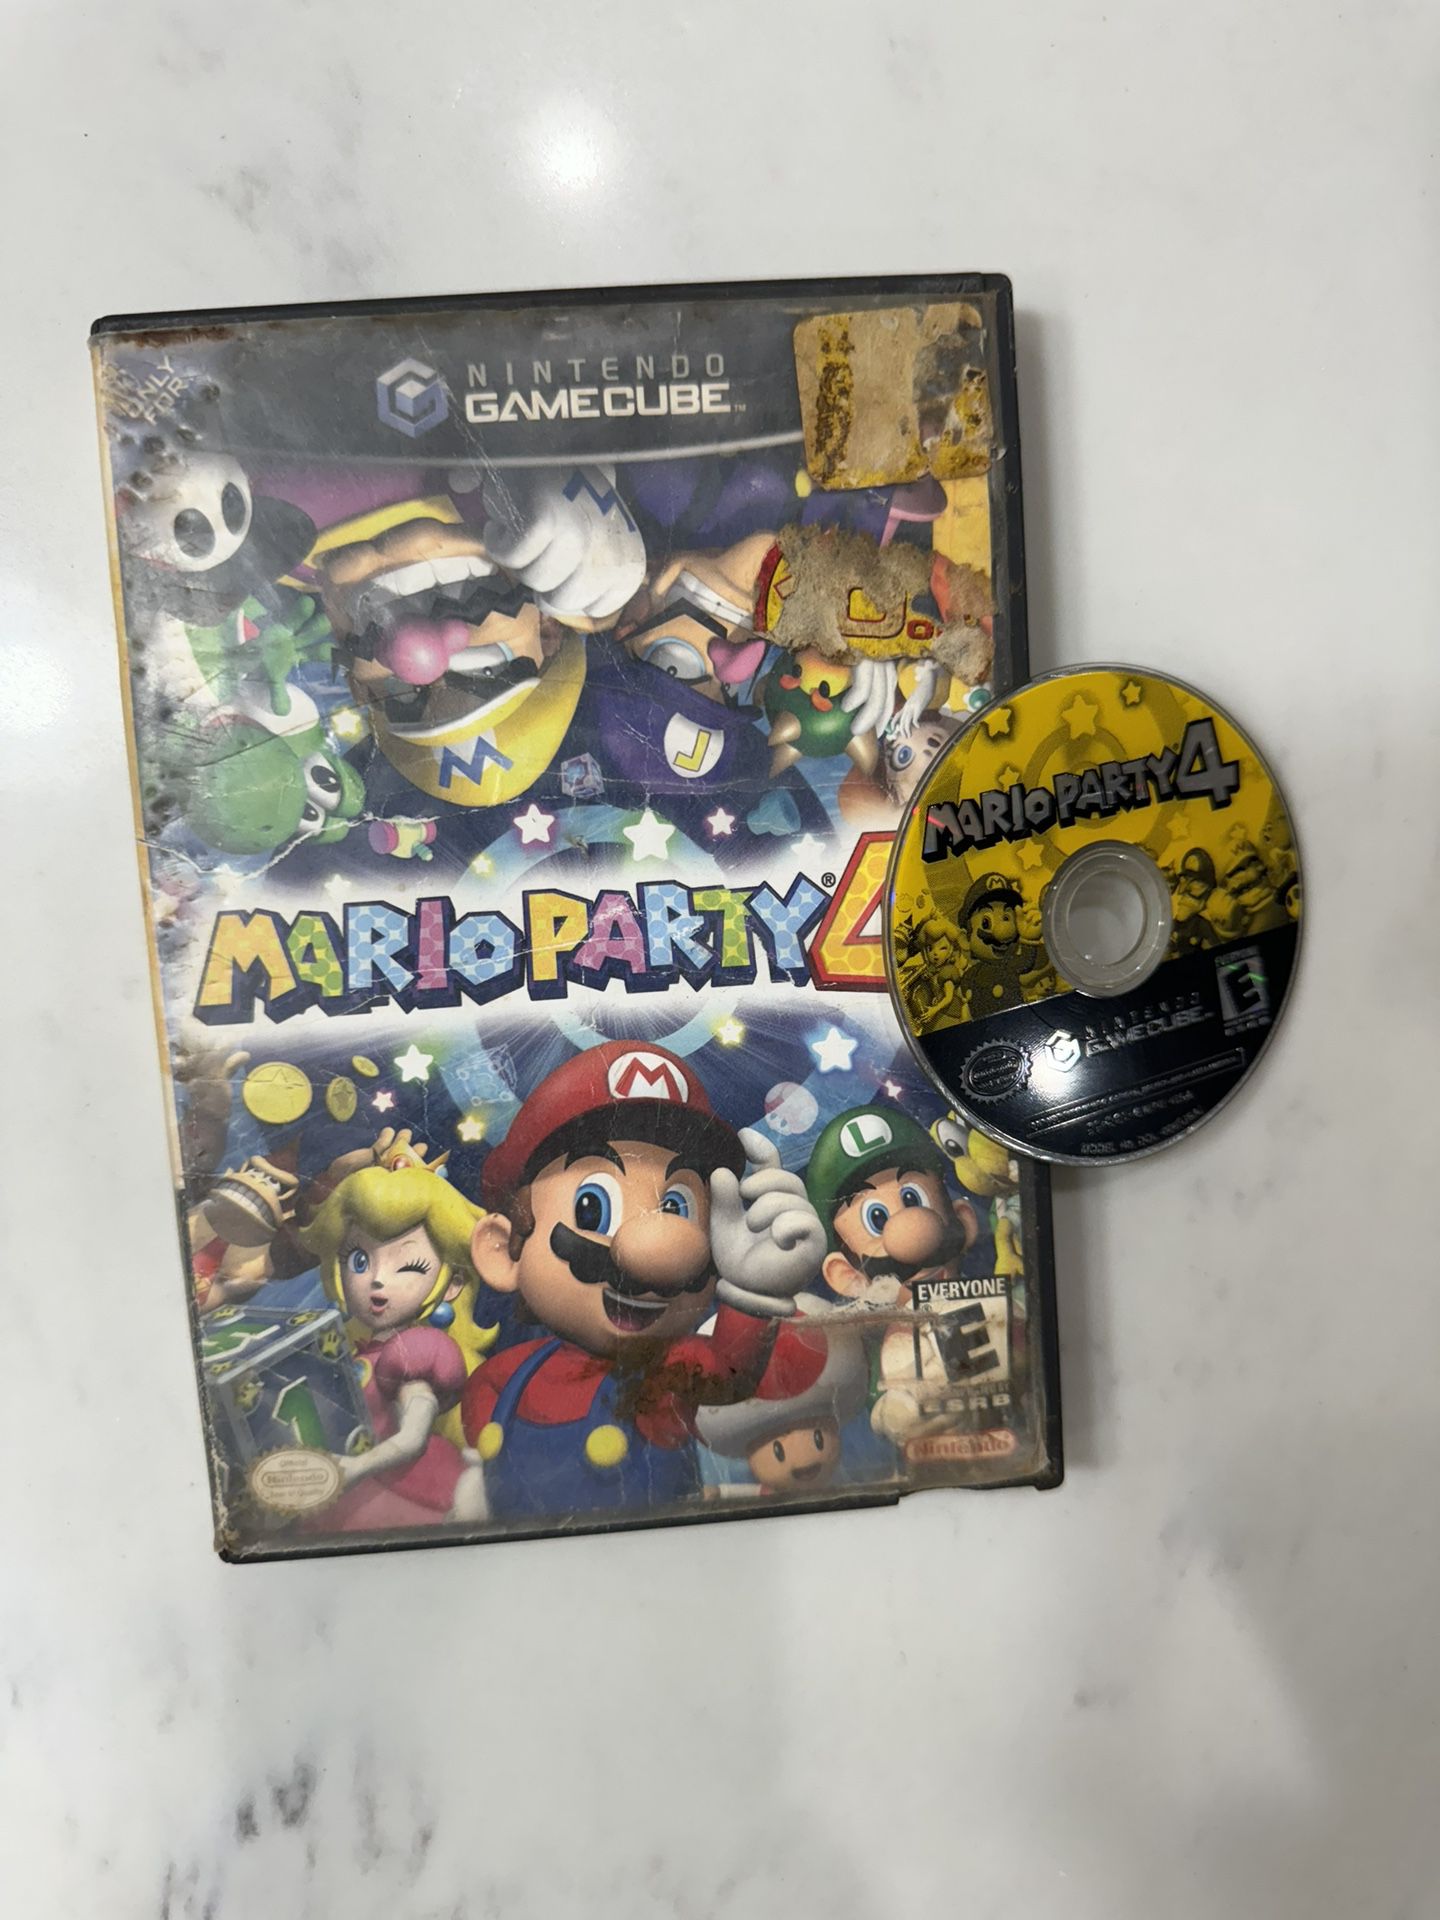 Mario Party 4 Scratch-Less for Nintendo GameCube